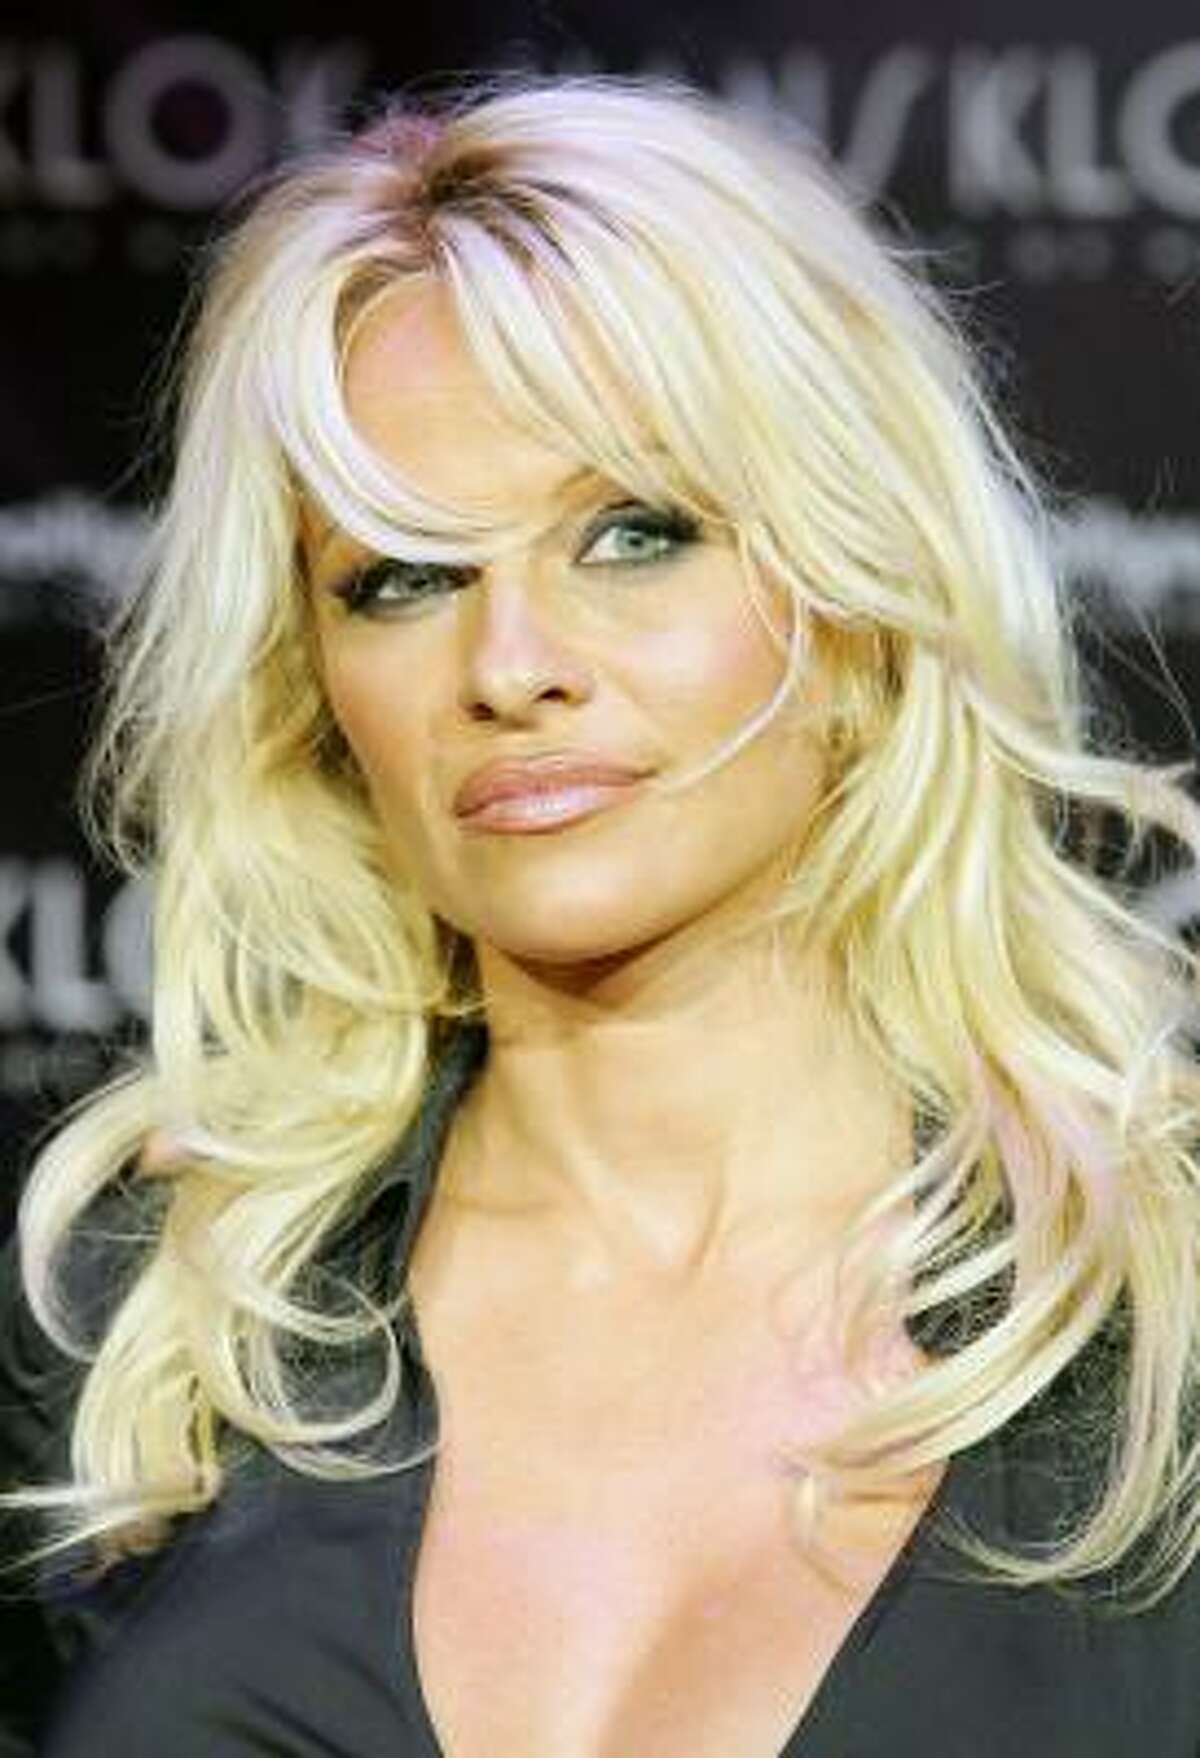 Maybe the third time down the aisle will be the charm for Pamela Anderson.